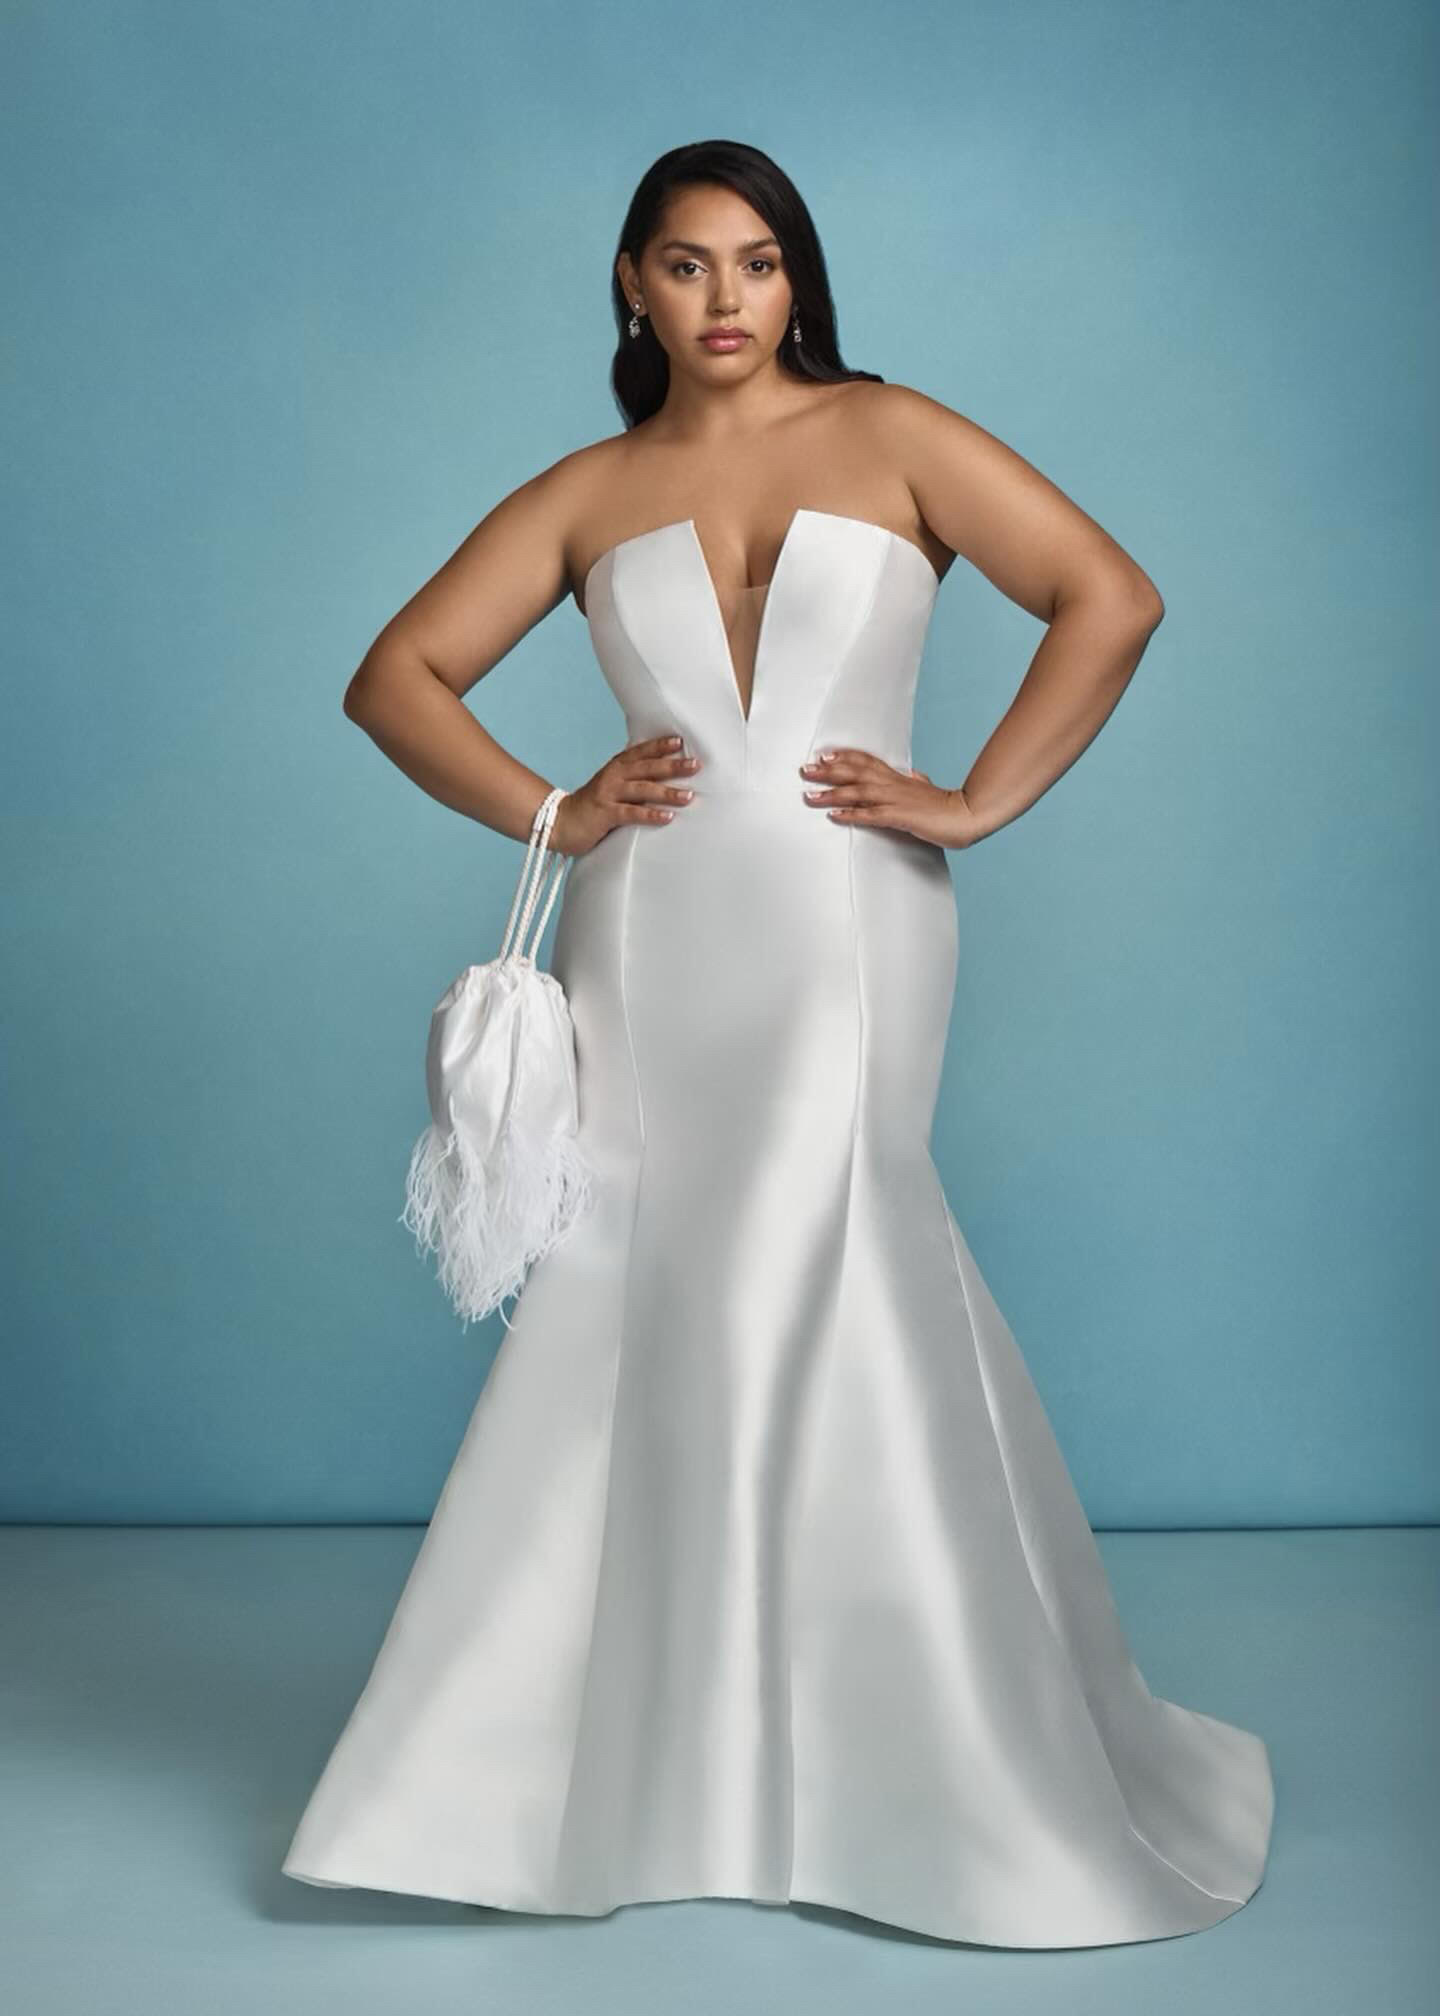 The Bella Rosa Collection: Timeless Elegance for the Plus-Size Bride